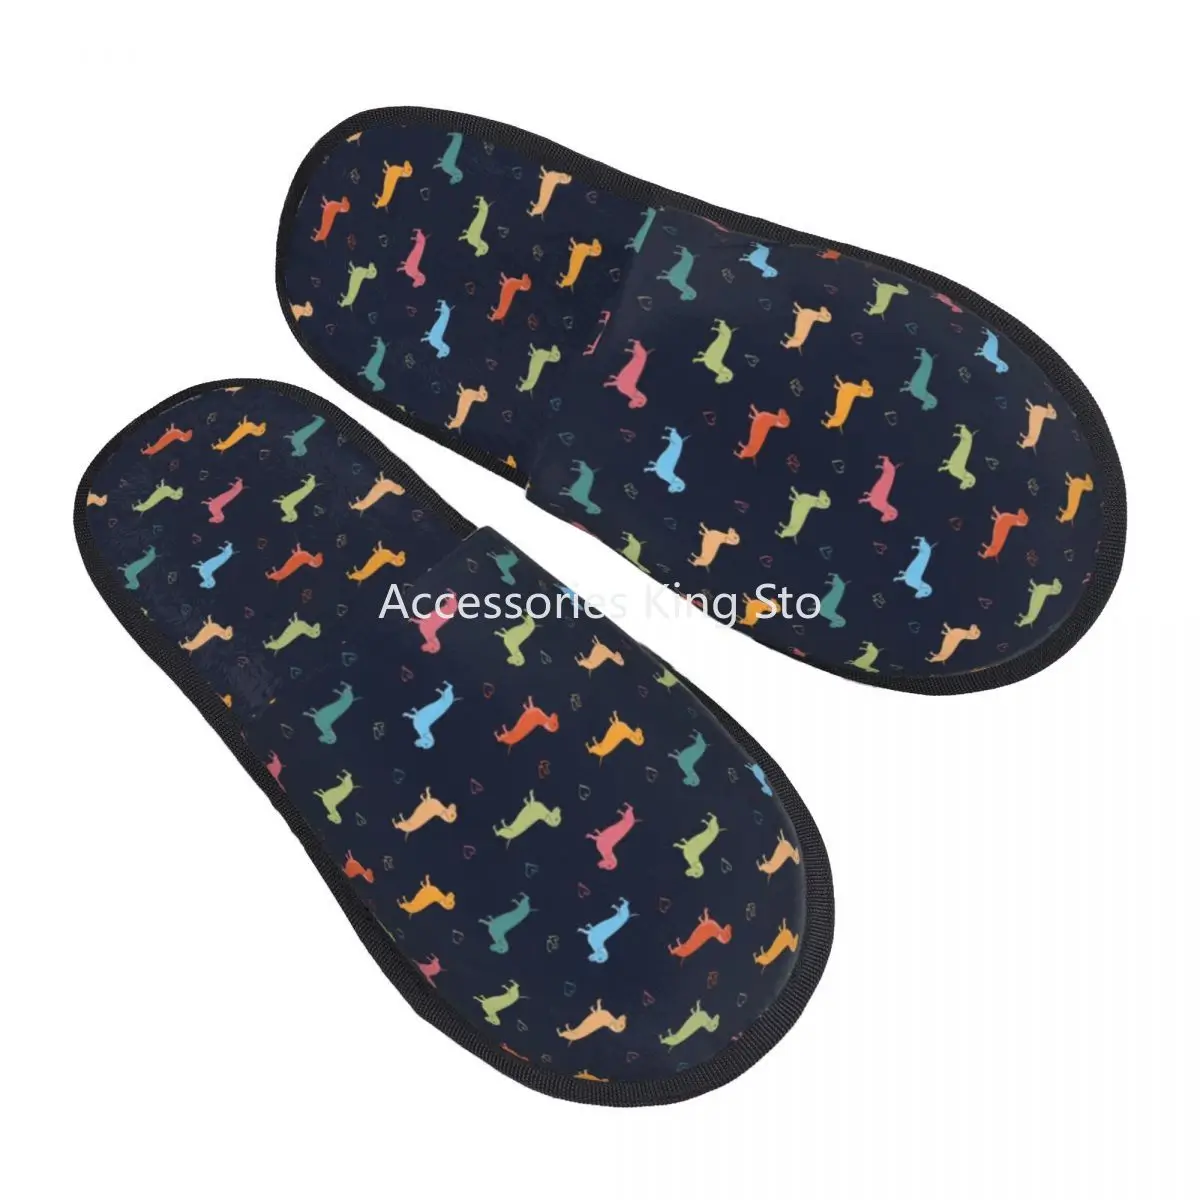 

Dachshund Soft Scuff With Memory Foam Slippers Women Badger Sausage the Wiener Dog Hotel House Shoes